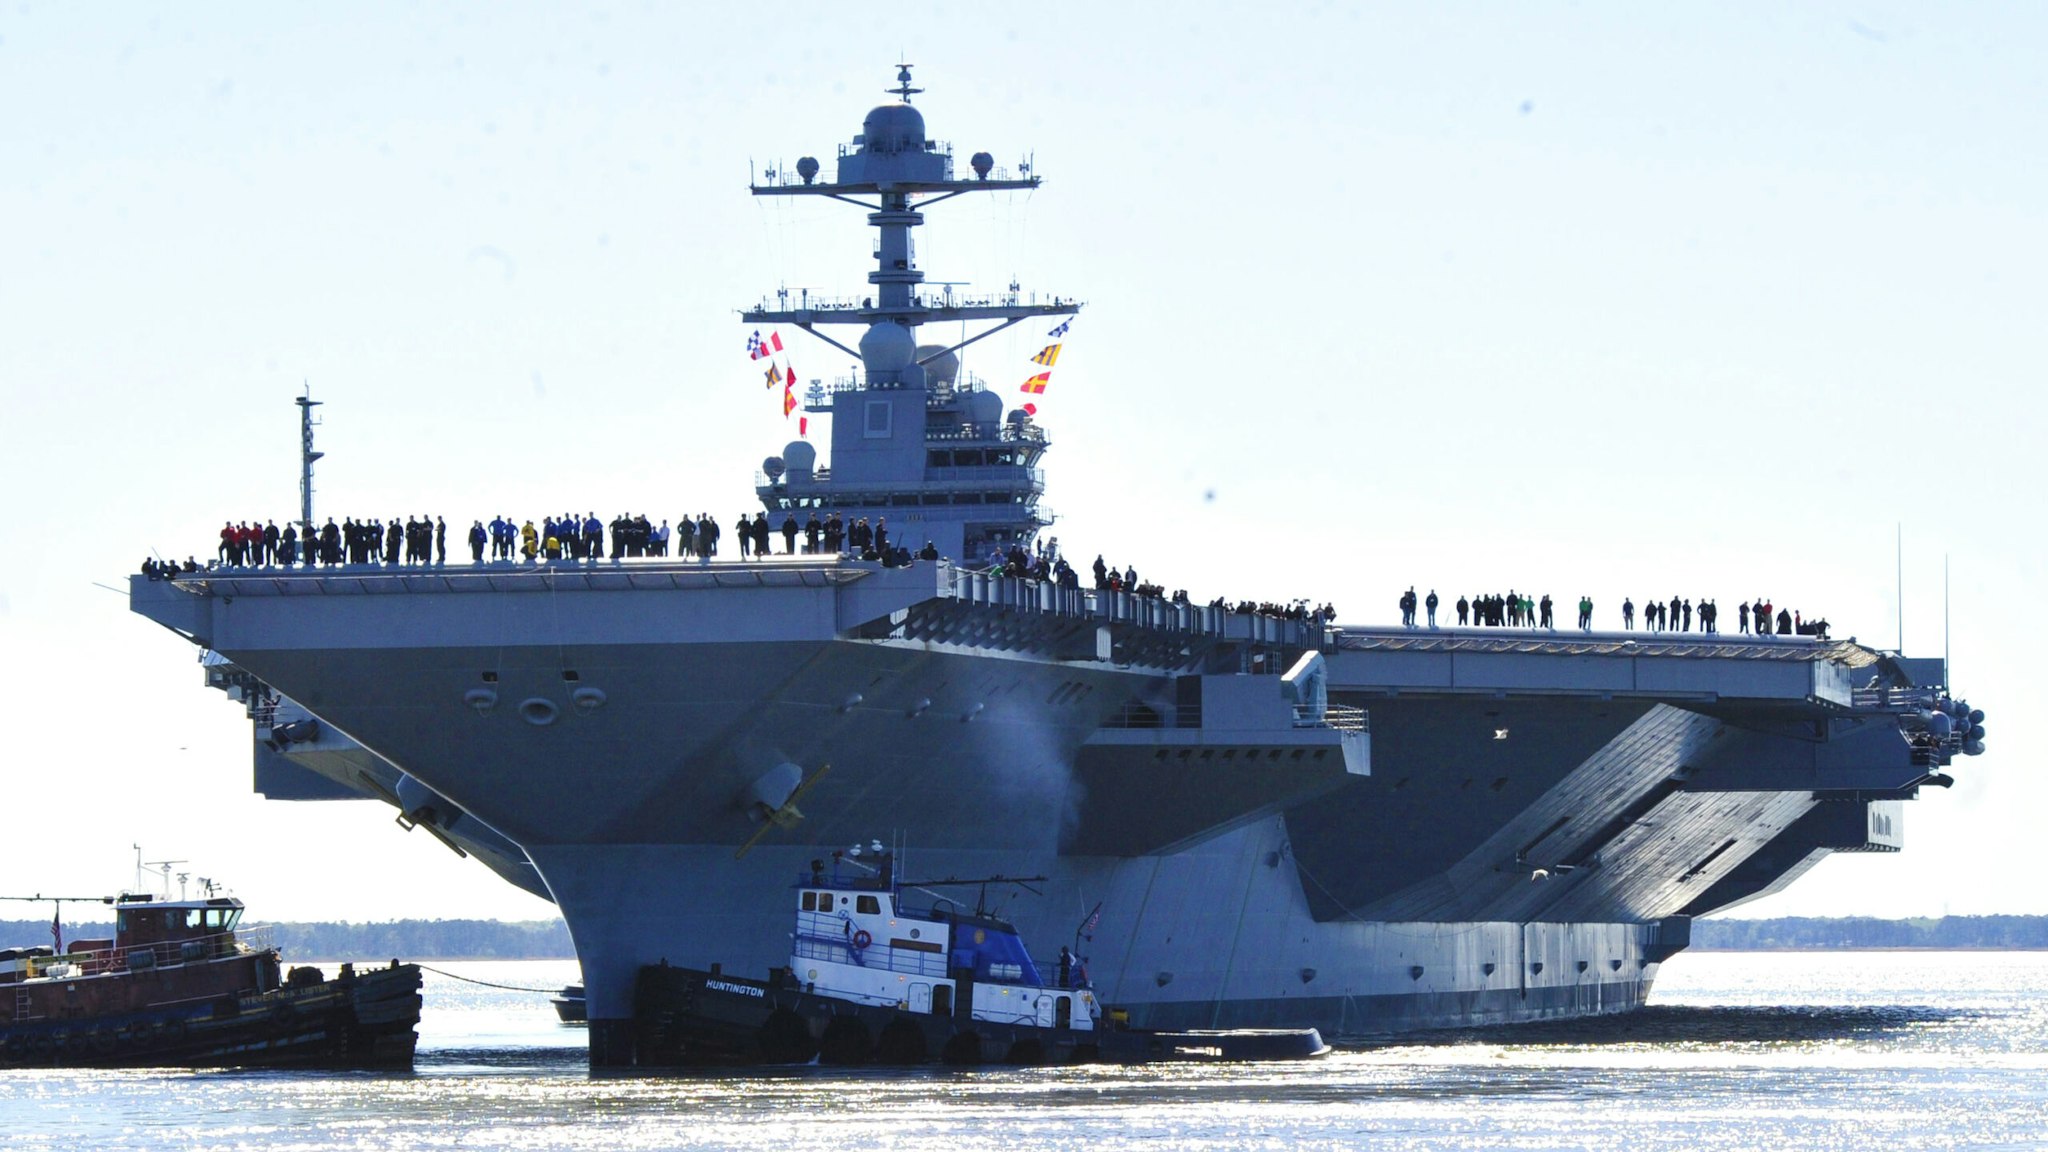 NEWPORT NEWS, VA - APRIL 8: In this handout photo provided by the U.S. Navy, the aircraft carrier Pre-Commissioning Unit (PCU) Gerald R. Ford (CVN 78) departs Huntington Ingalls Industries Newport News Shipbuilding for builder's sea trials off the U.S. East Coast on April 8, 2017 in Newport News, Virginia. The first-of-class ship, the first new U.S. aircraft carrier design in 40 years, will spend several days conducting builder's sea trials, a comprehensive test of many of the ship's key systems and technologies.